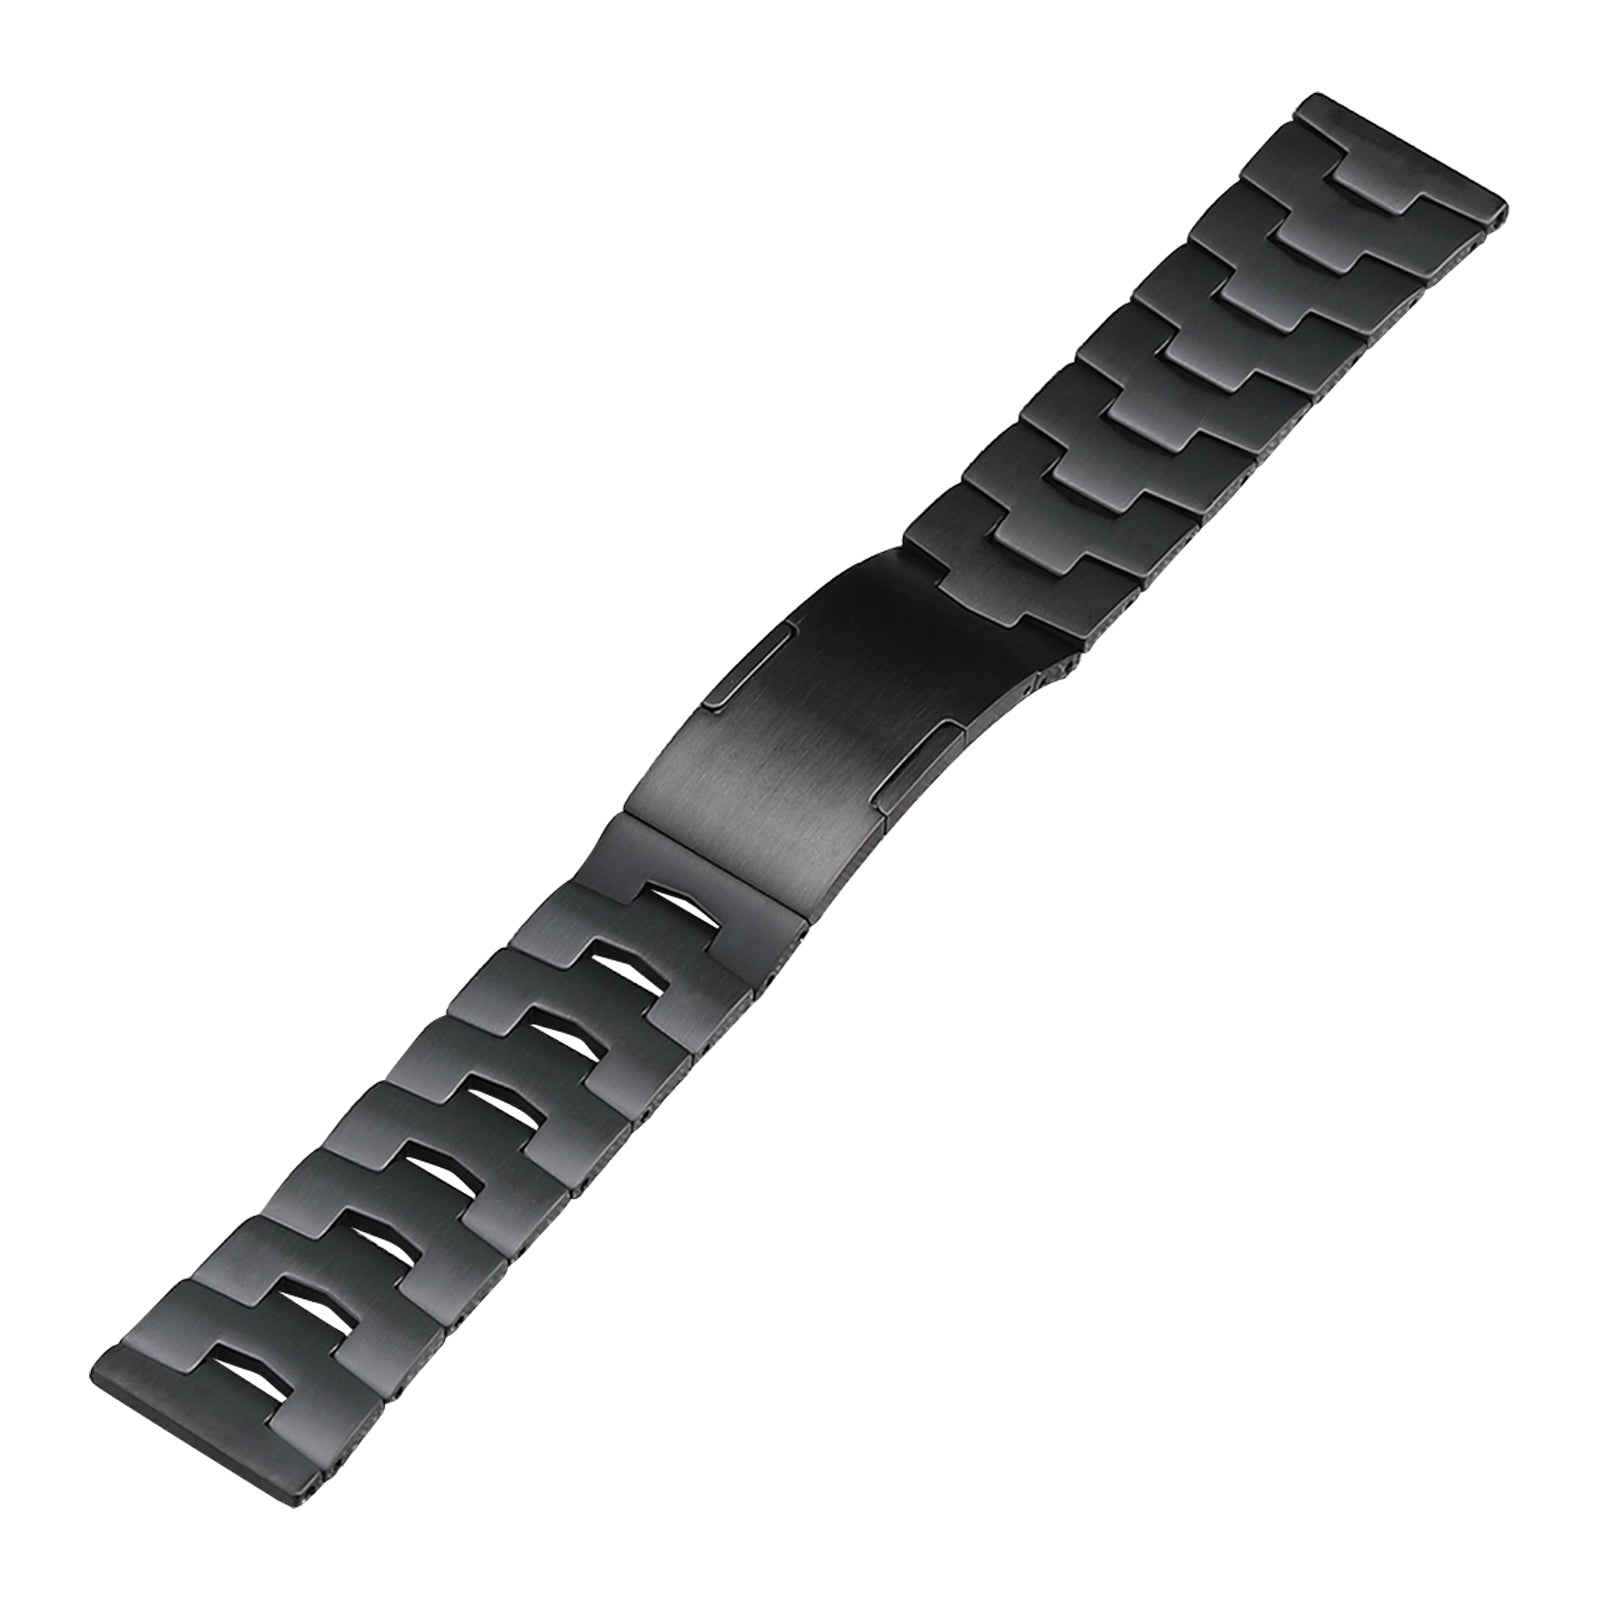 For Huawei Watch GT 3 SE / GT 2 Pro / Watch 3 Pro Titanium Steel Watch Strap 22mm Replacement Watch Band - Black